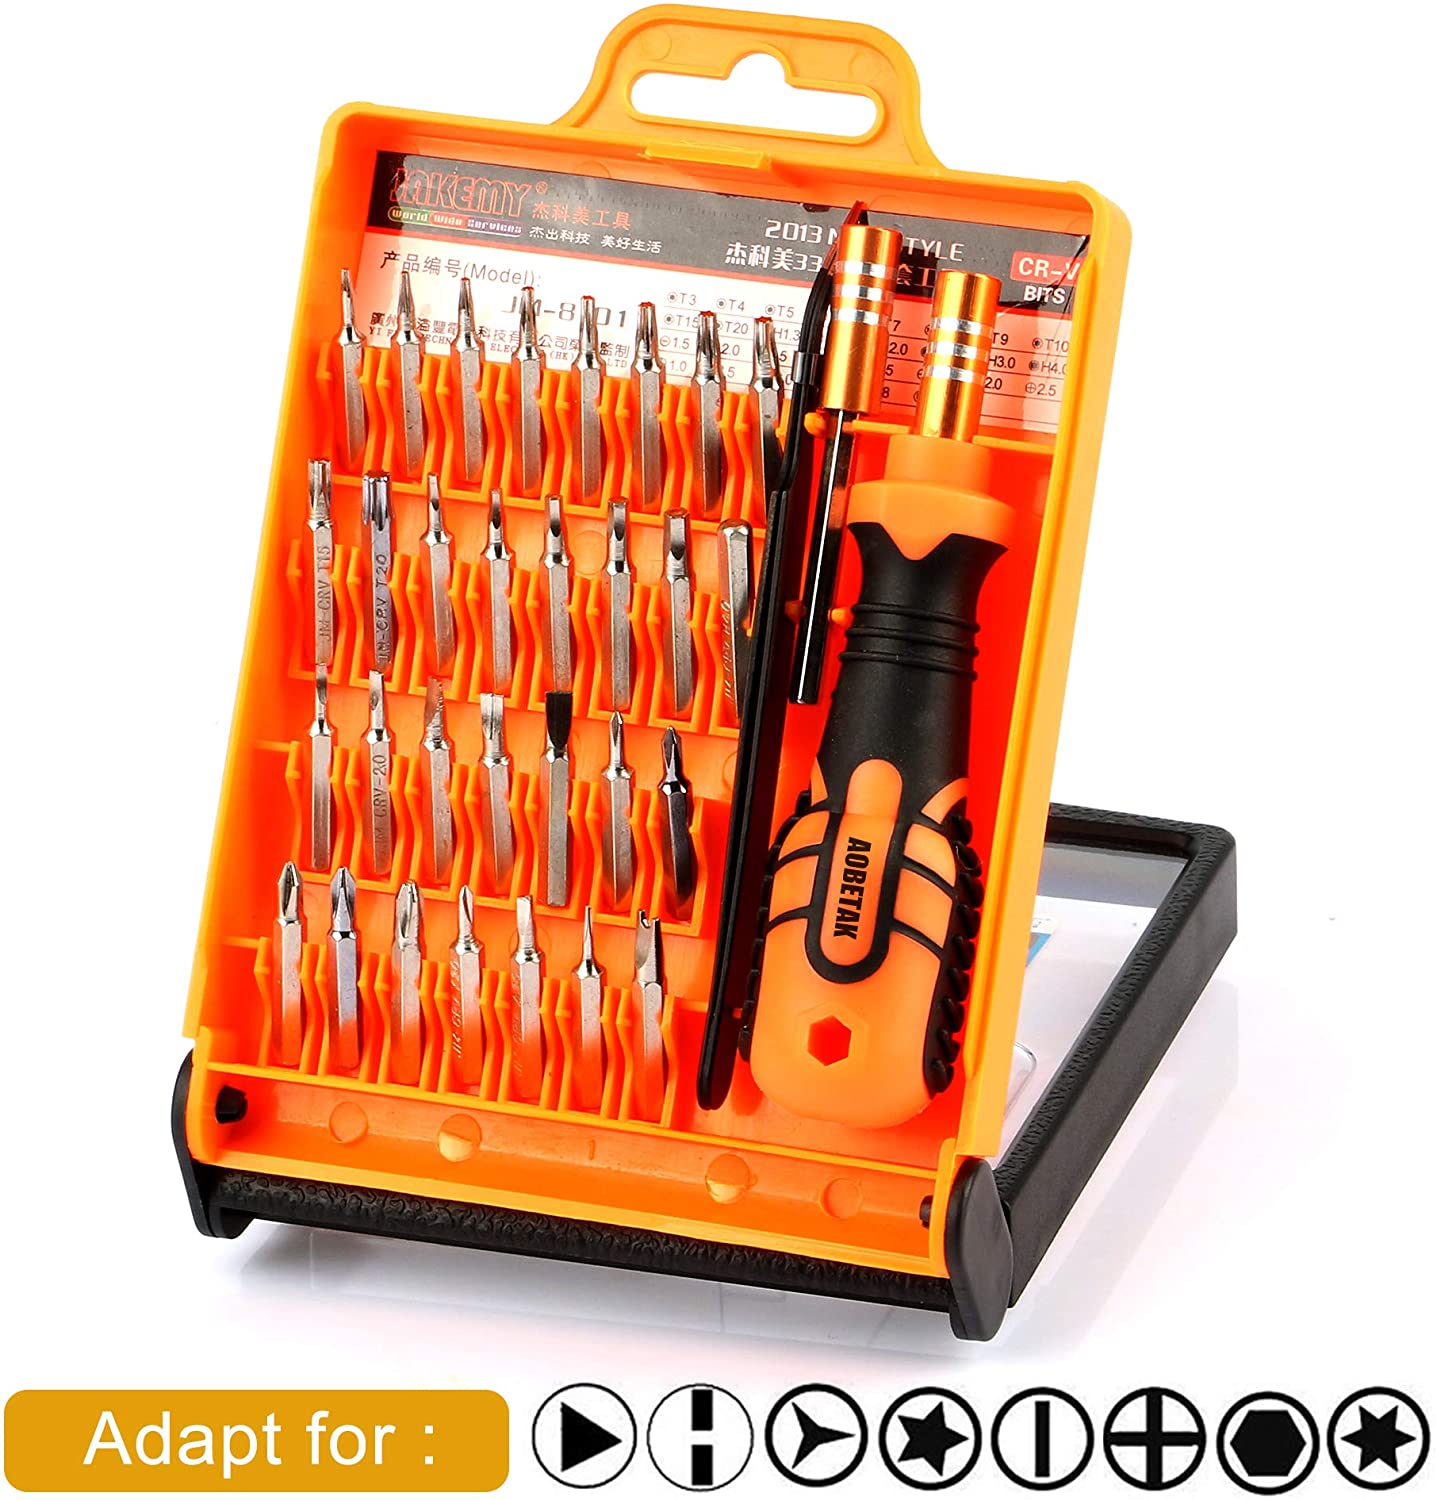 Precision Torx Driver Set, AOBETAK 33 in 1 Magnetic Small Screwdriver Bit Sets with Case Include Pentalobe/Ratchet/Hex/Star/Phillips,Mini Repair Tool Kit for Electronic Iphone Laptops PC Watch Glasses